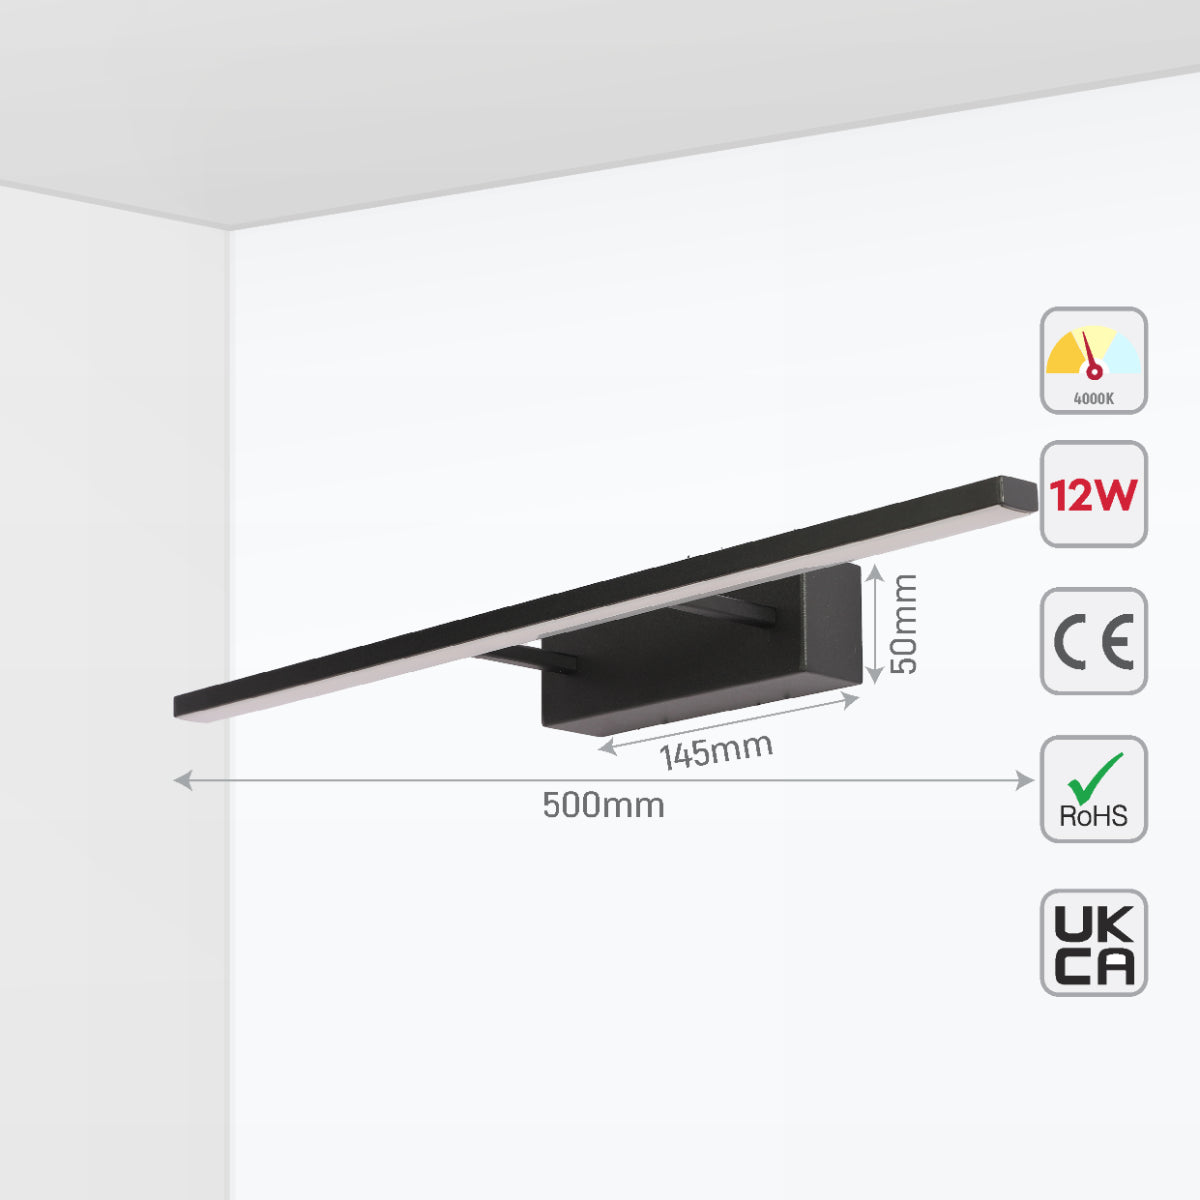 Size and certifications of Contemporary LED Light for Picture Frames & Bathroom Sanity Mirrors - 50cm 117-032697